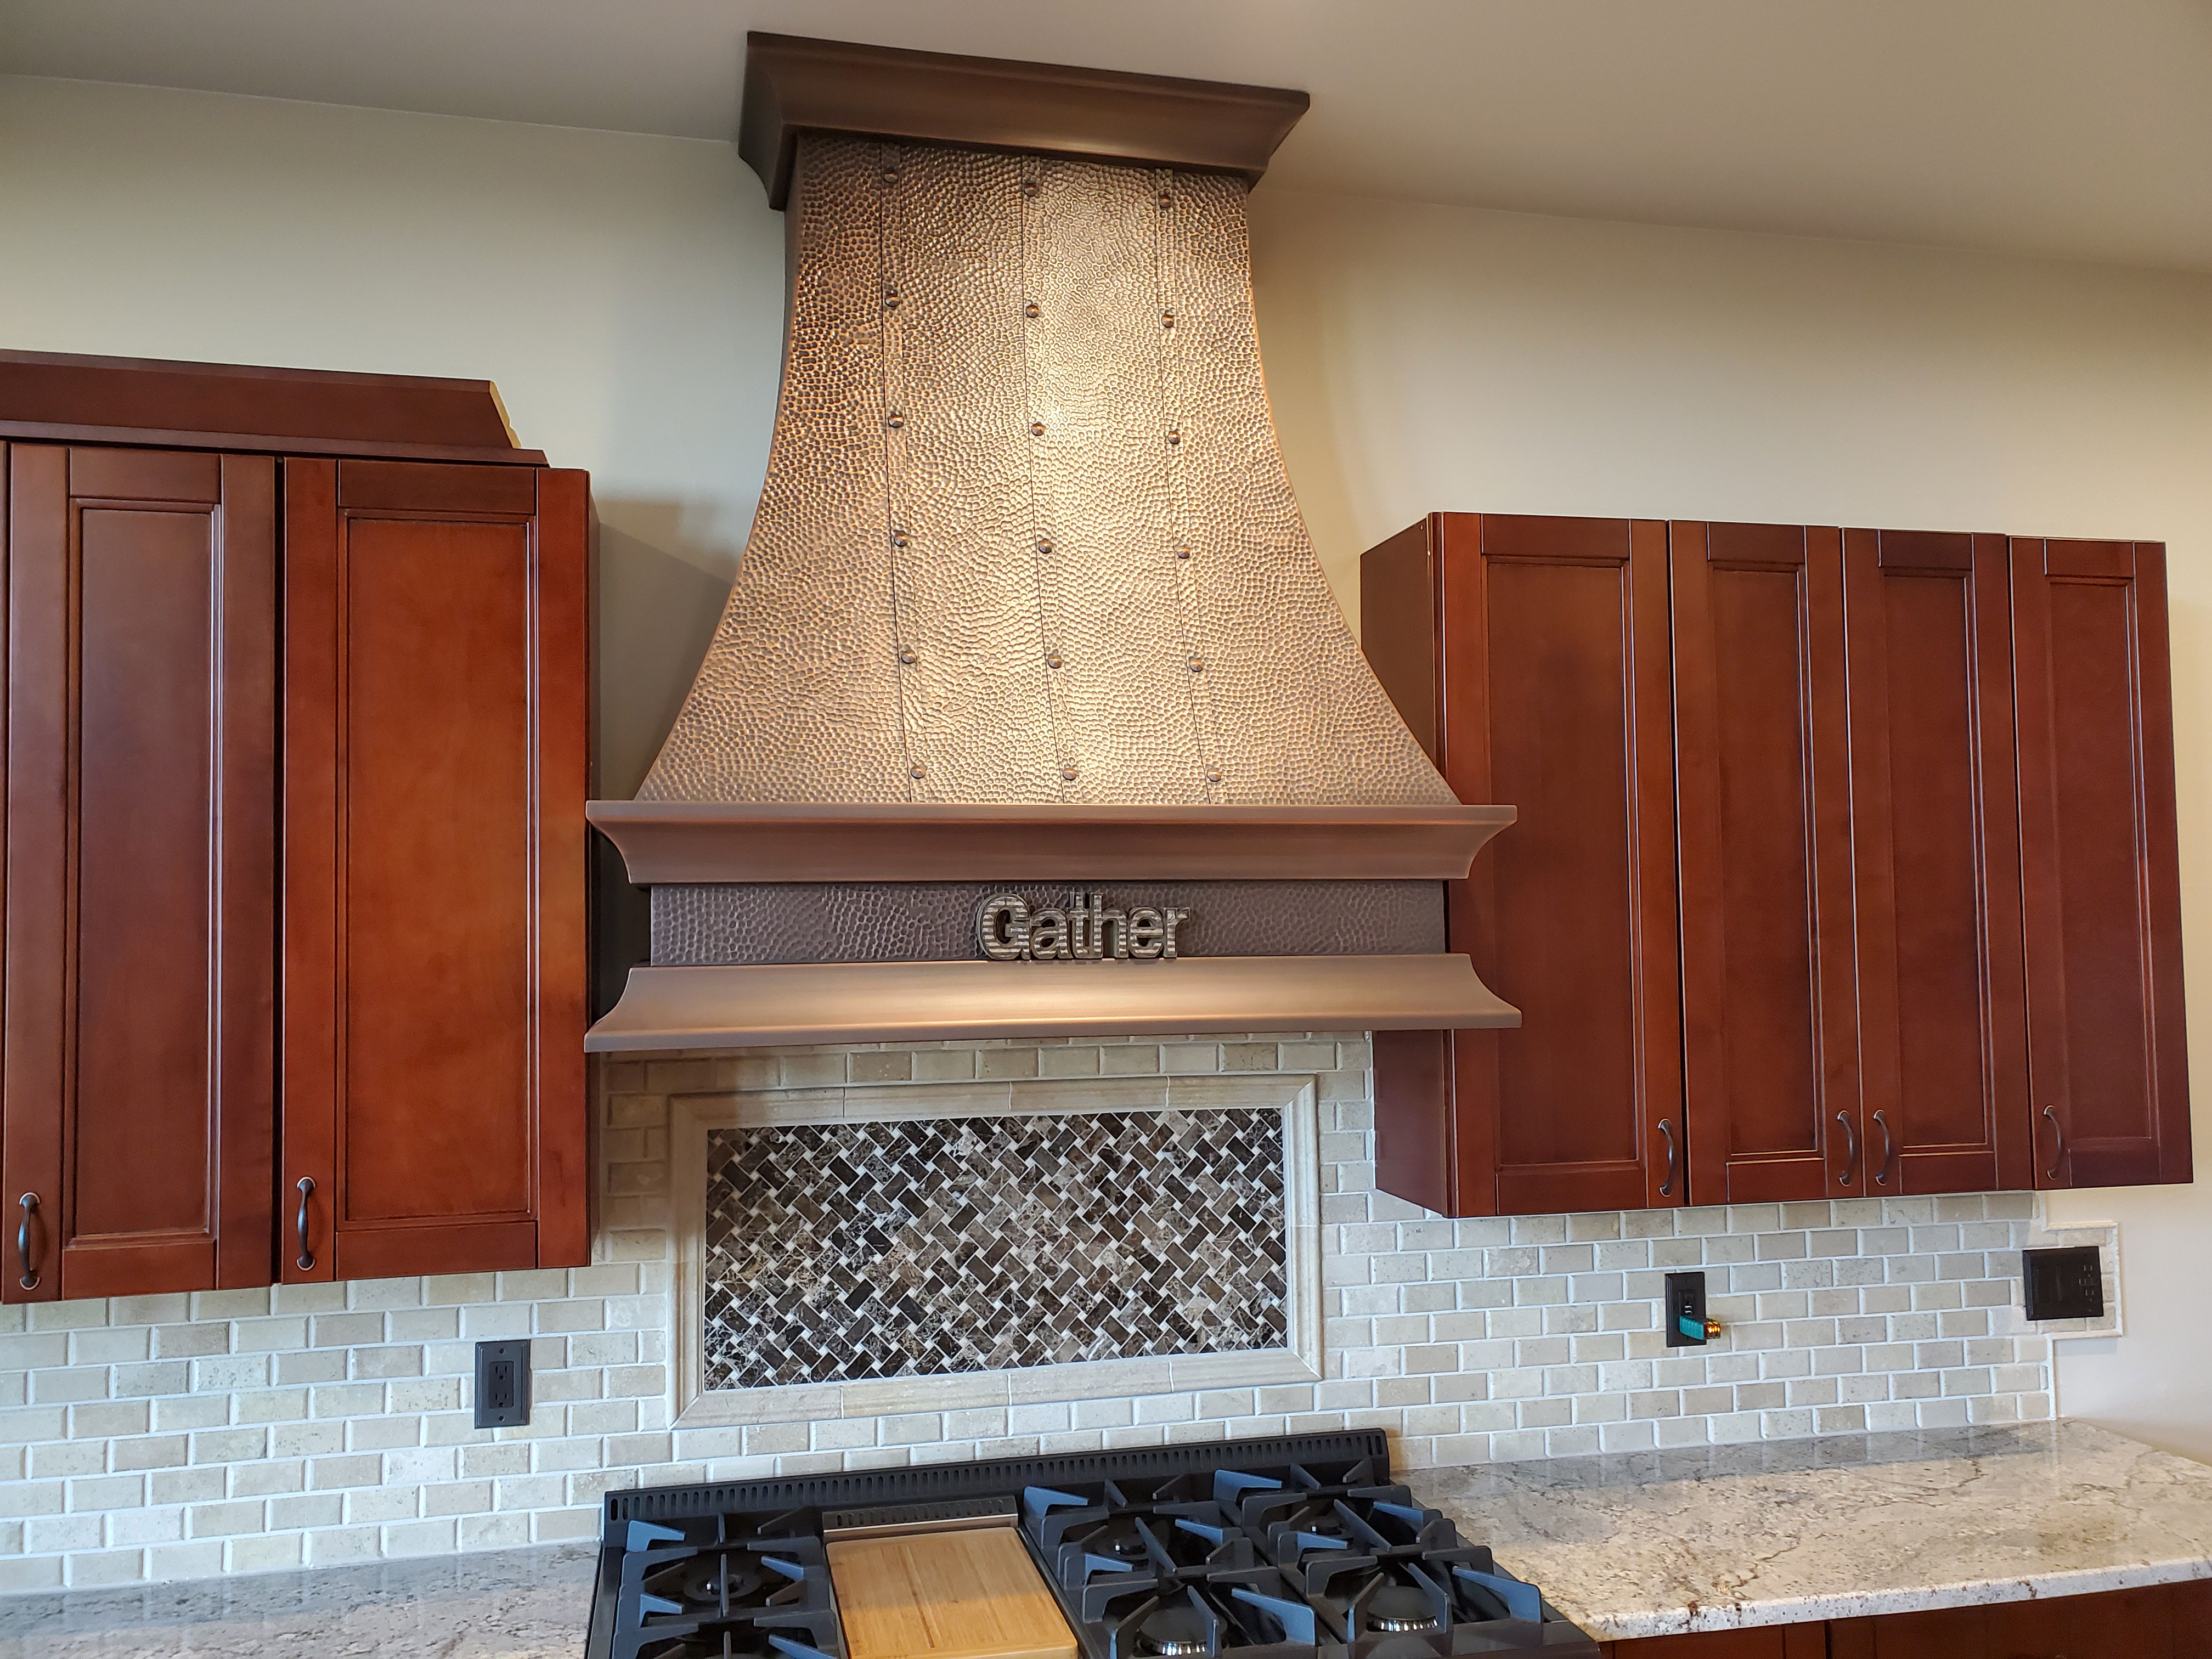 Contemporary copper range hood with modern industrial kitchen renovation featuring brown kitchen cabinets, sleek marble countertops